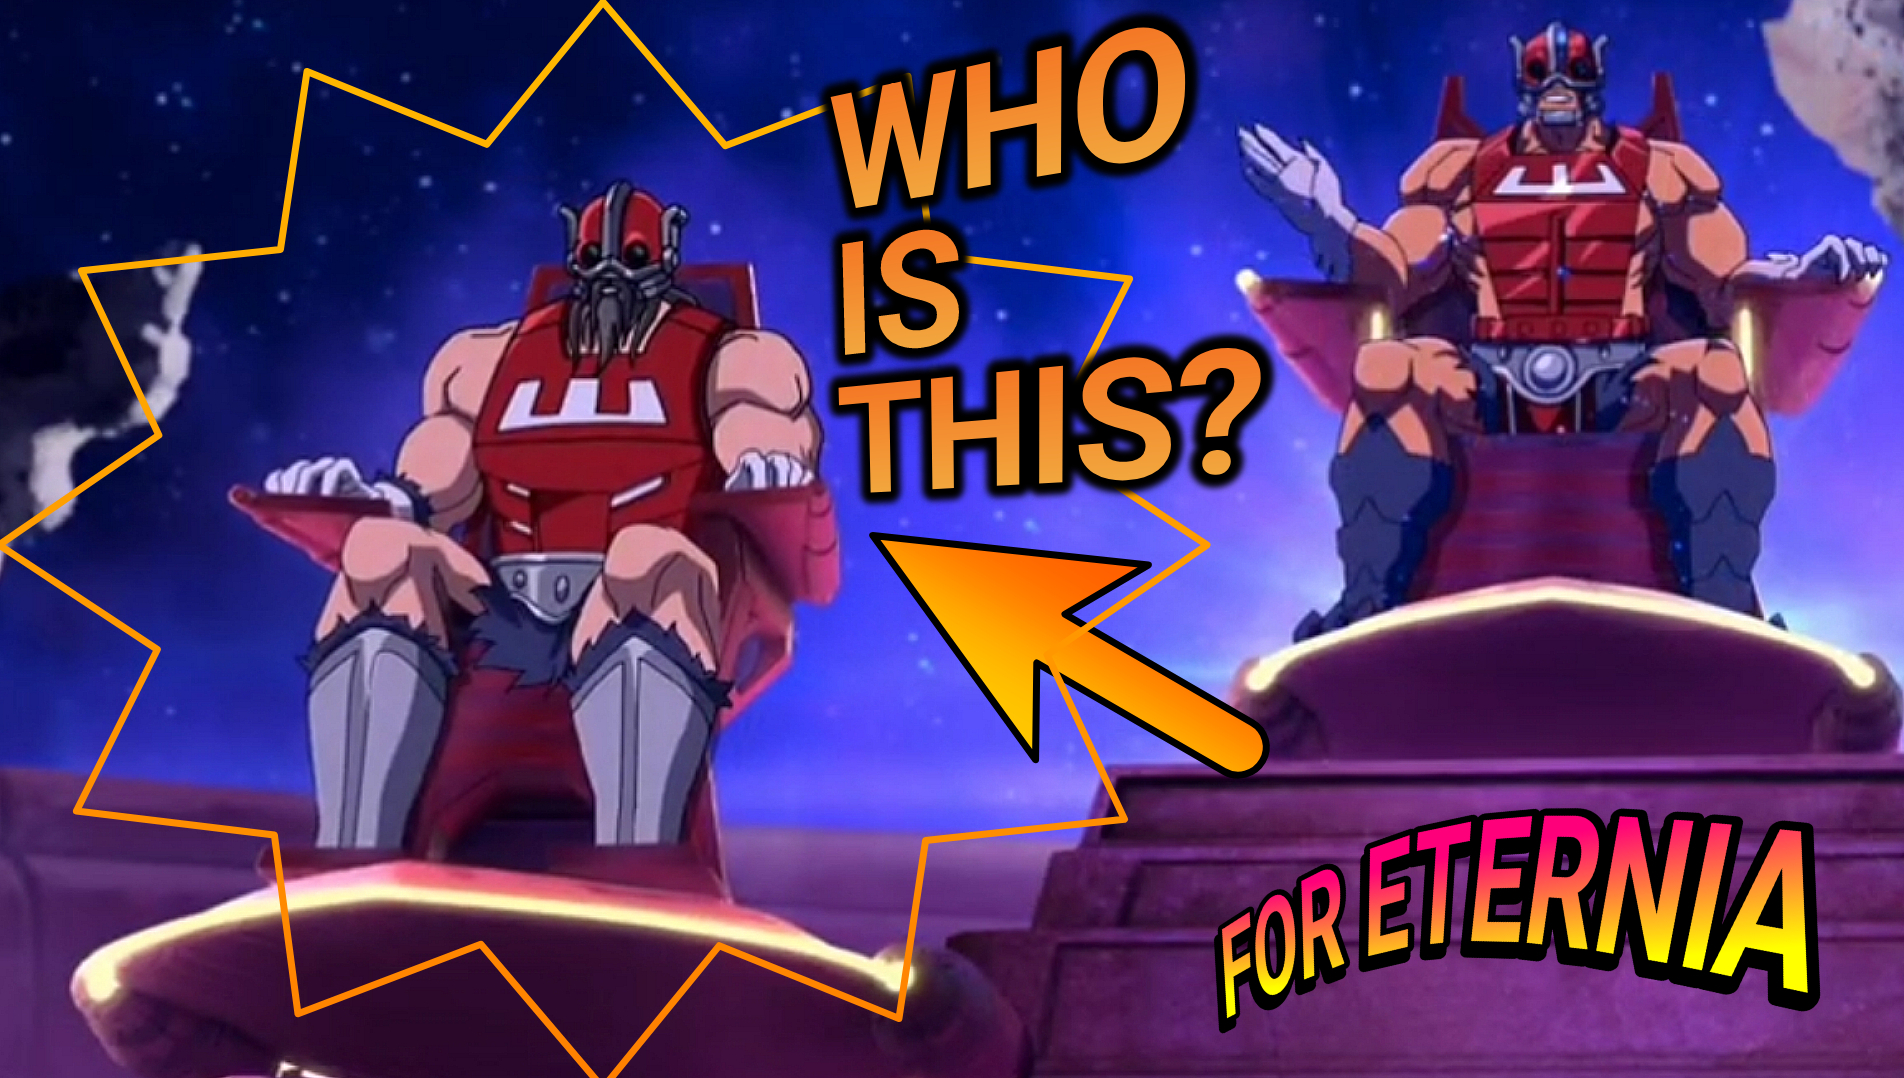 Who is Zodac’s right-hand man in “Masters of the Universe: Revolution”?